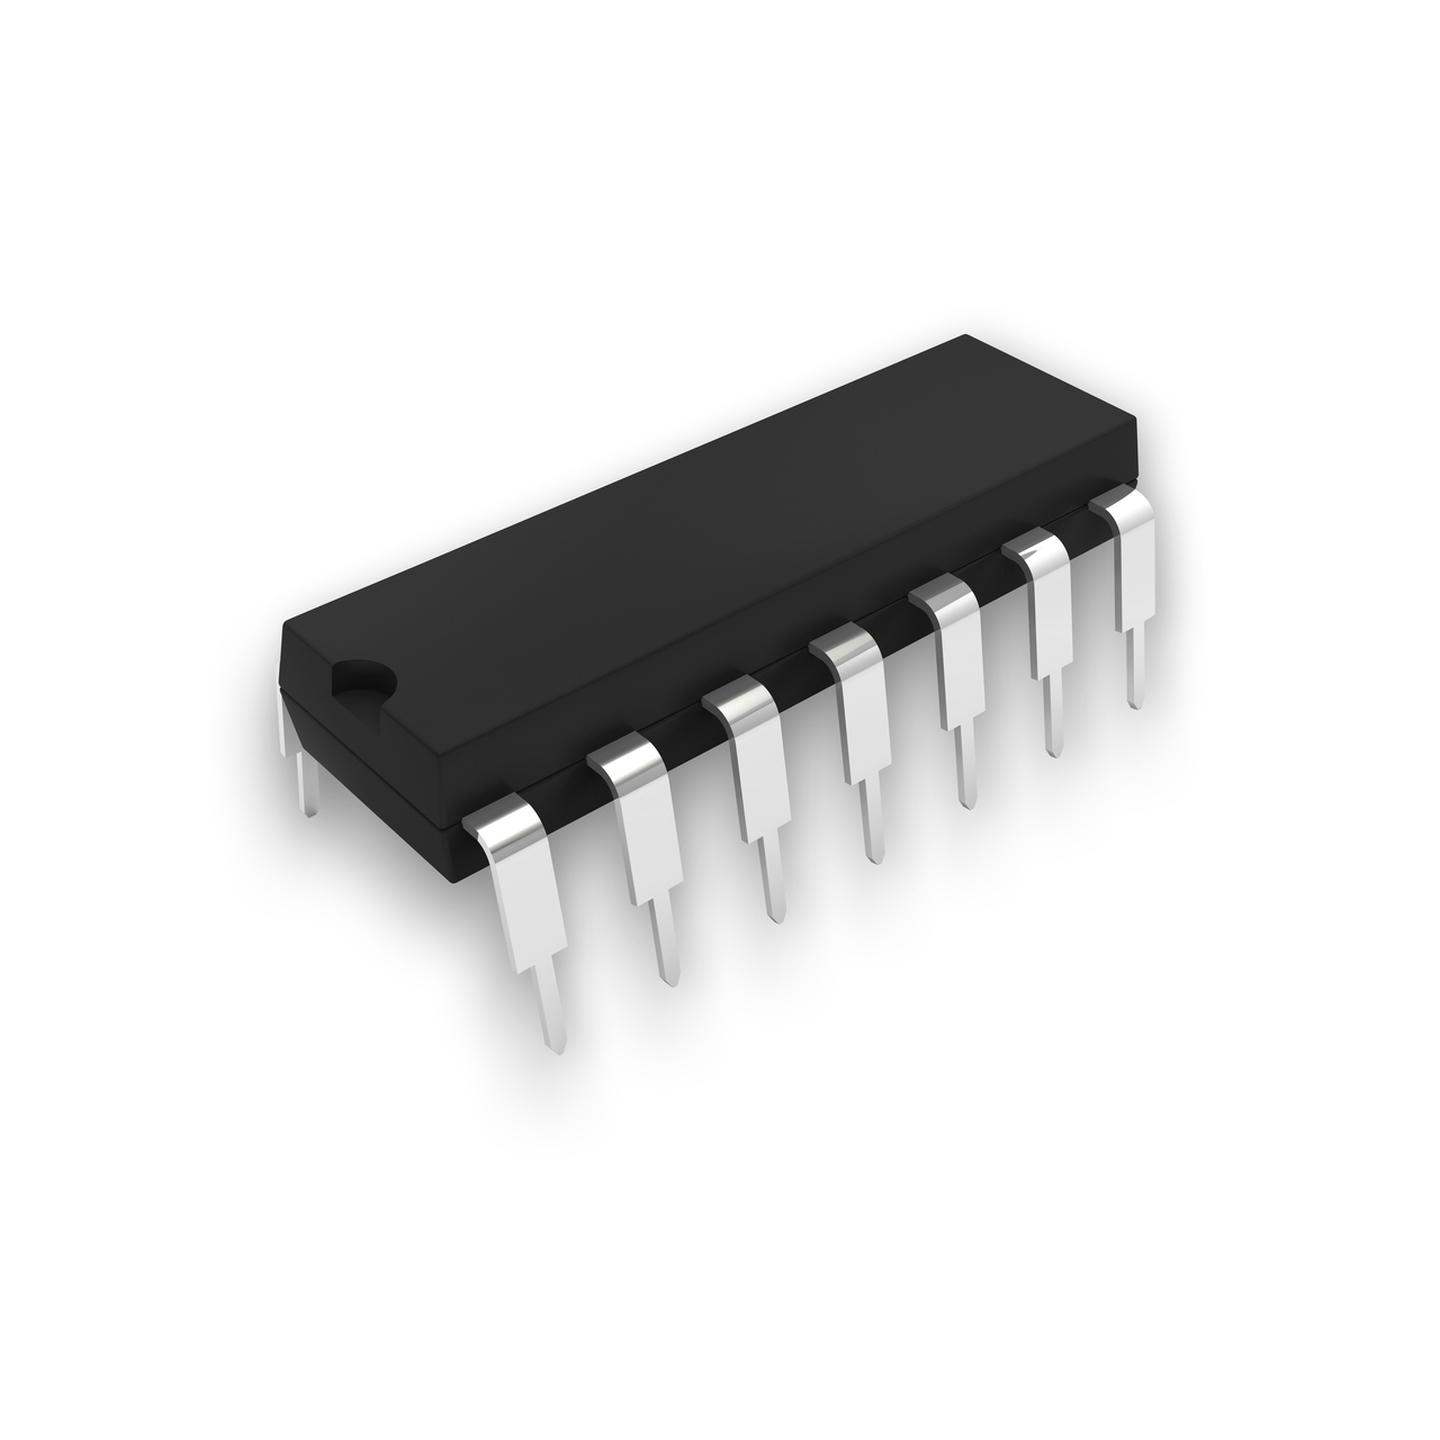 LM319 High Speed Dual Comparator Linear IC